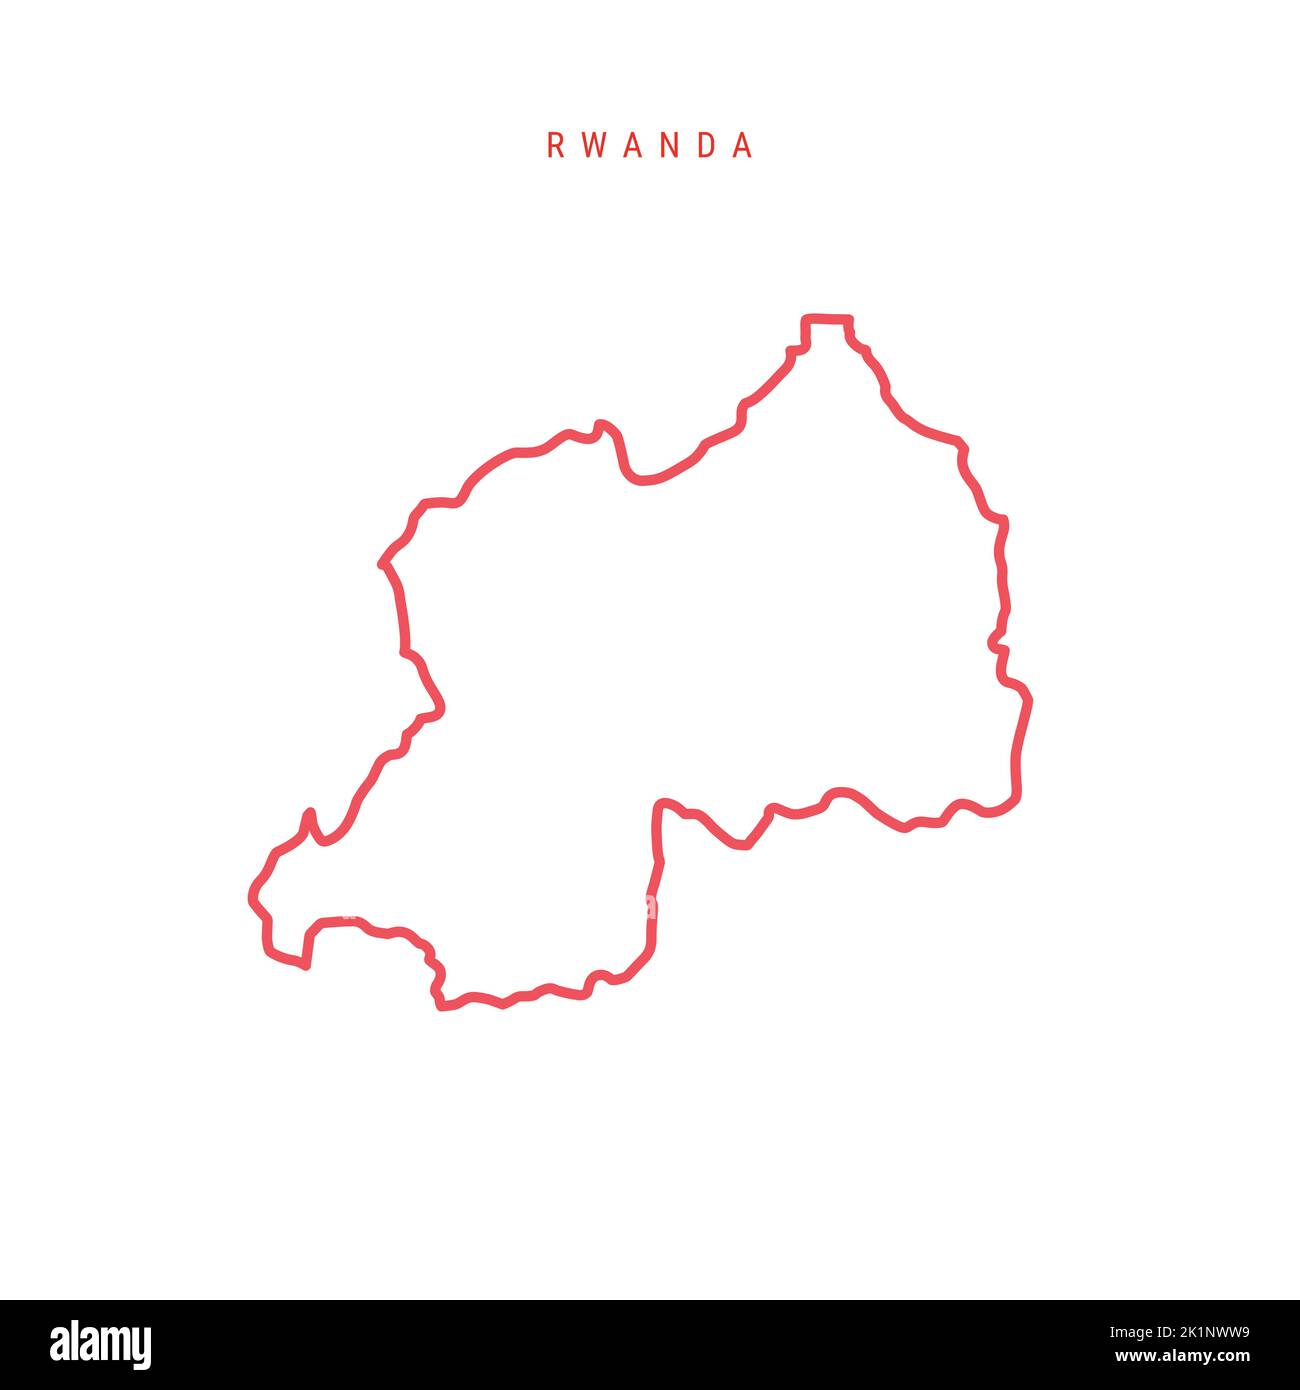 Rwanda editable outline map. Rwandan red border. Country name. Adjust line weight. Change to any color. Vector illustration. Stock Vector